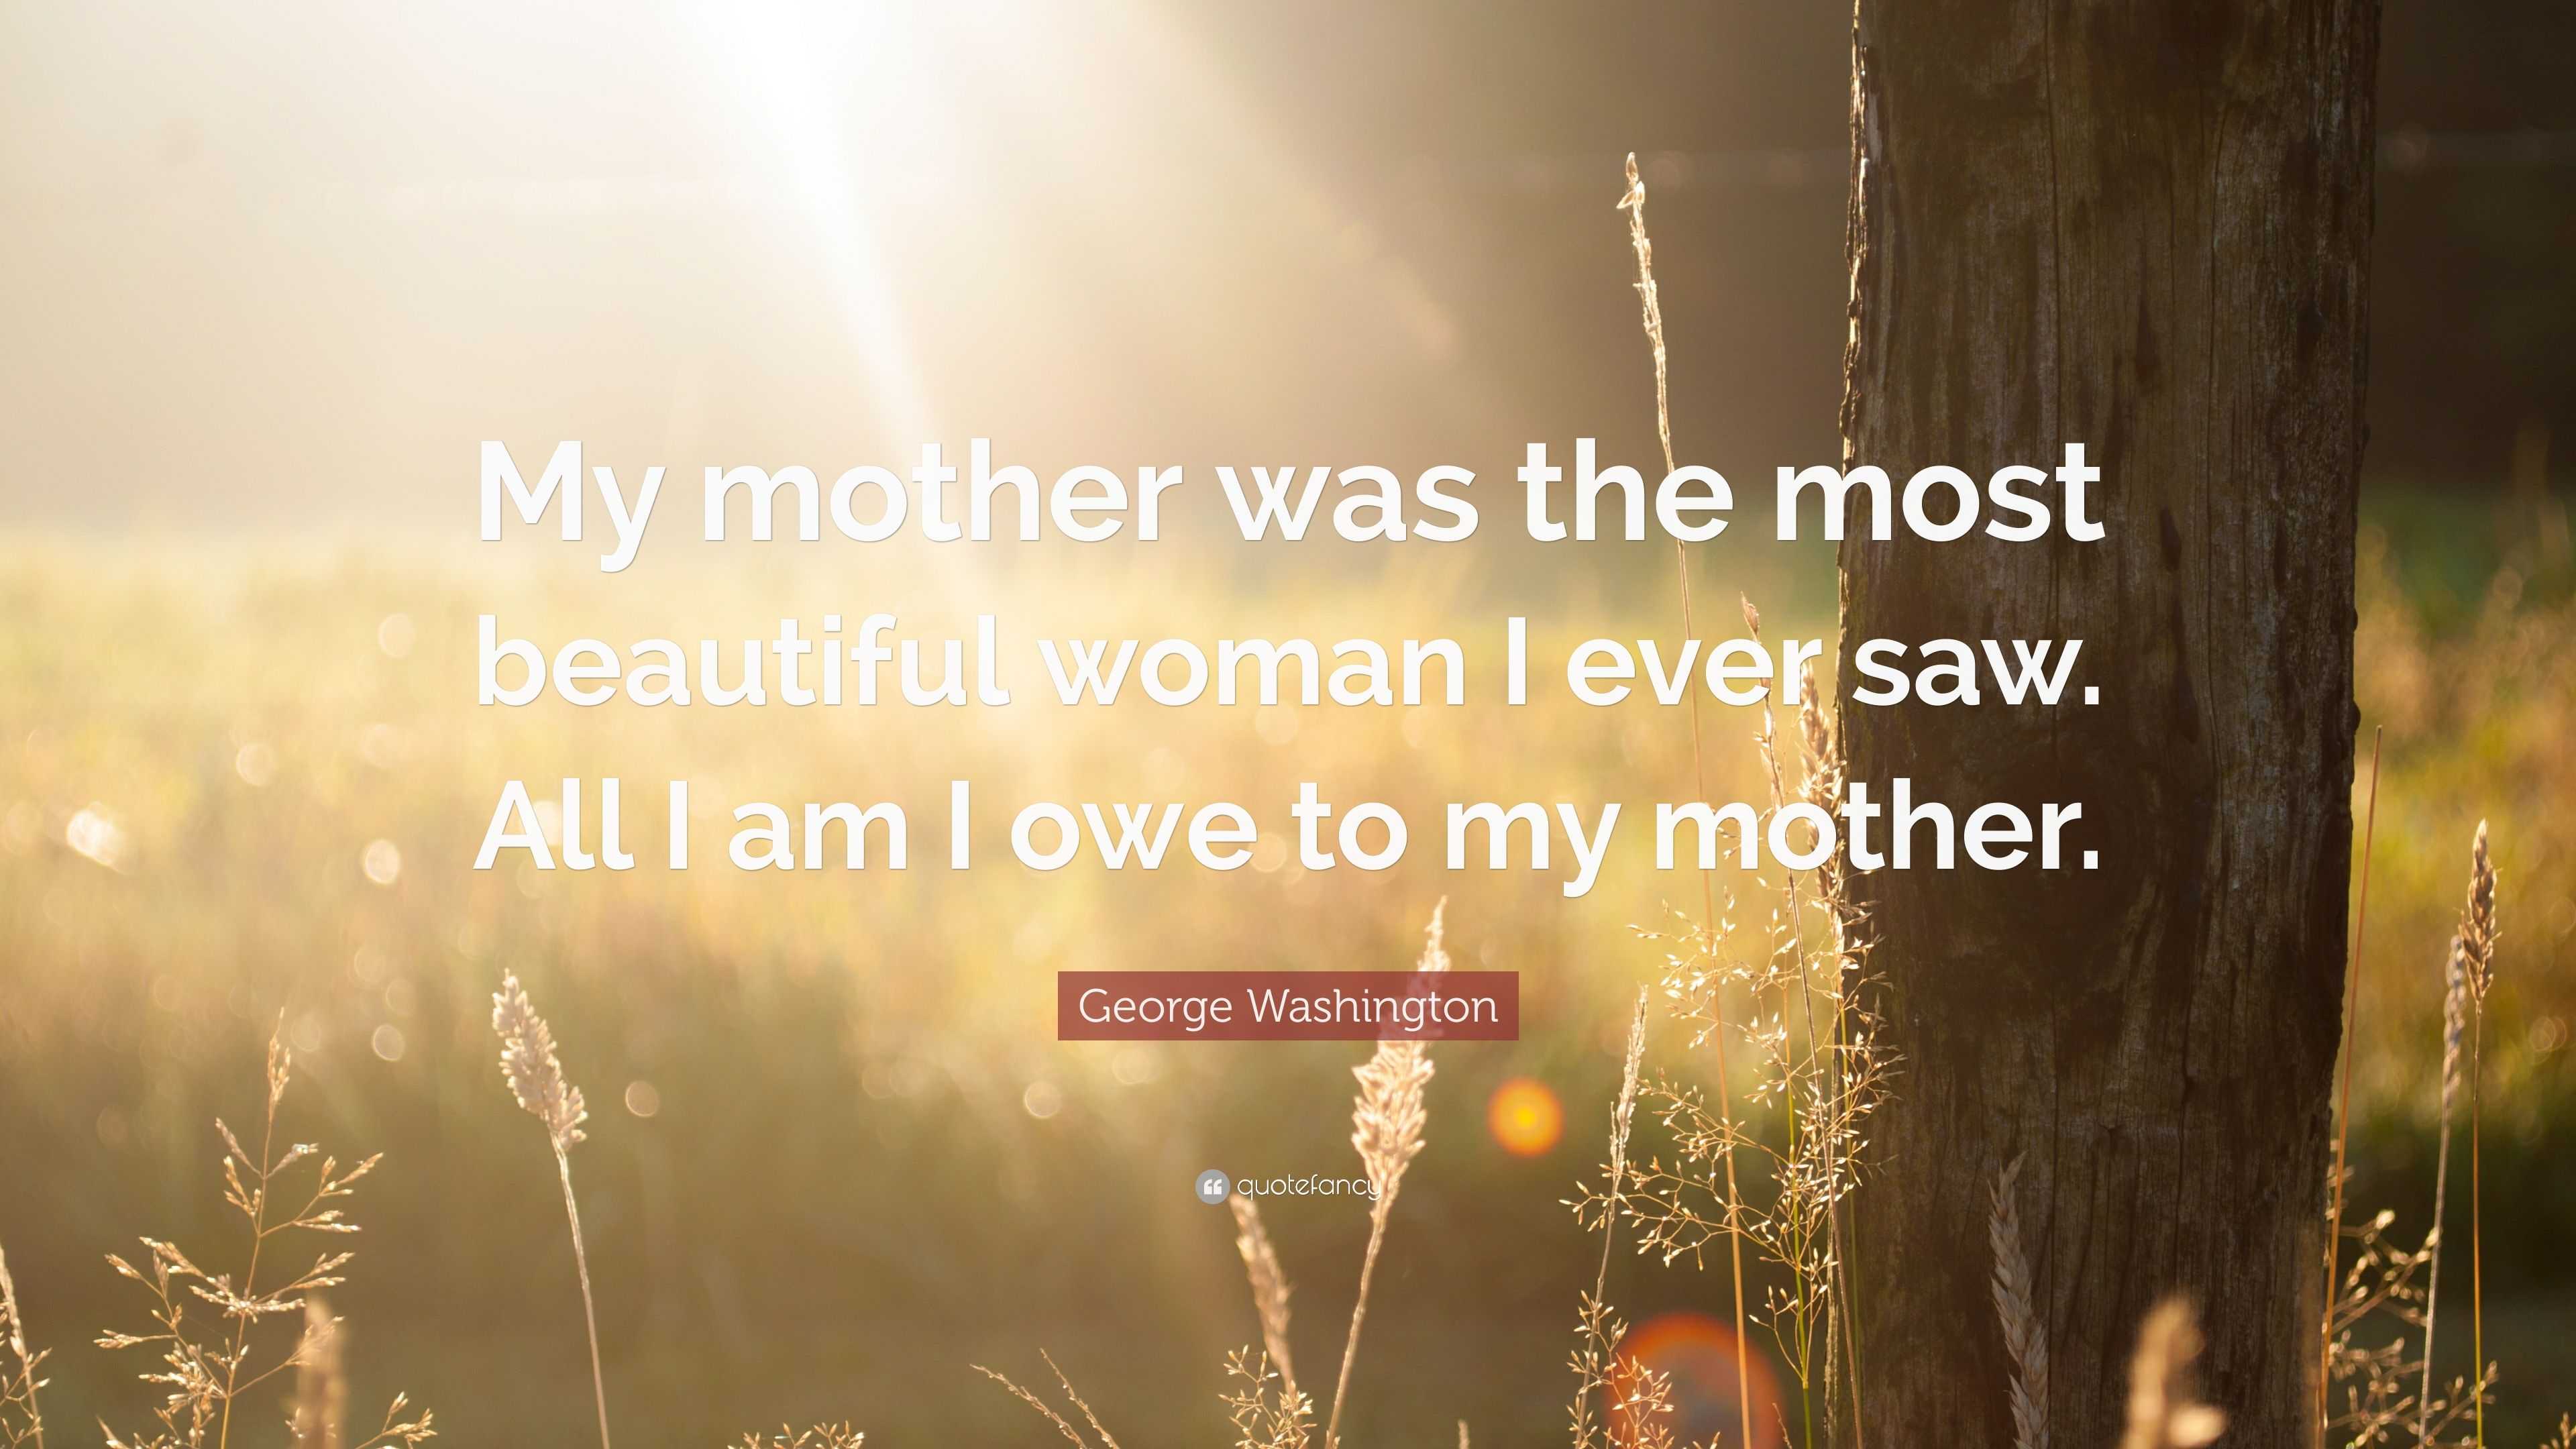 George Washington Quote: “My mother was the most beautiful woman I ever ...